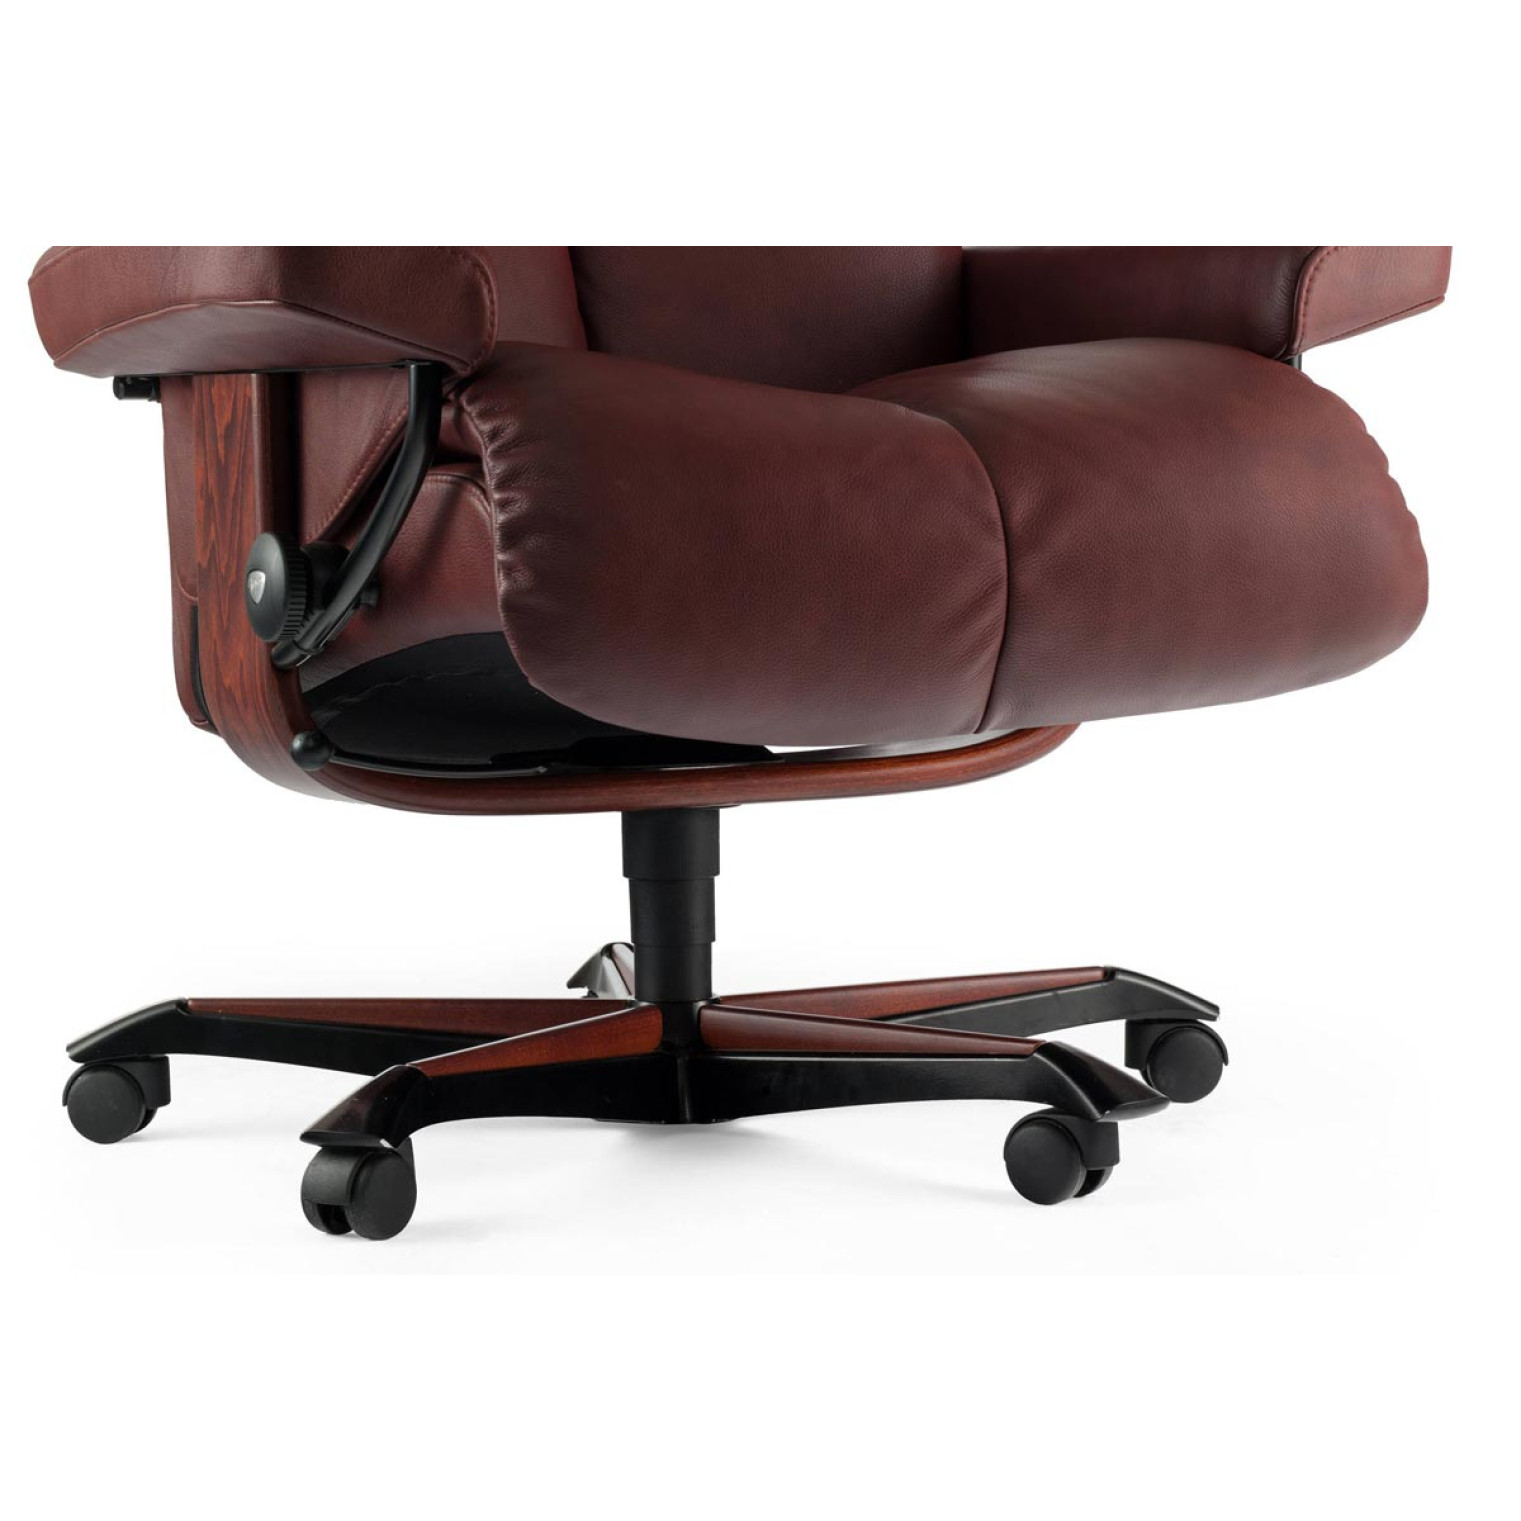 Stressless Consul Office Chair From 1 695 00 By Stressless